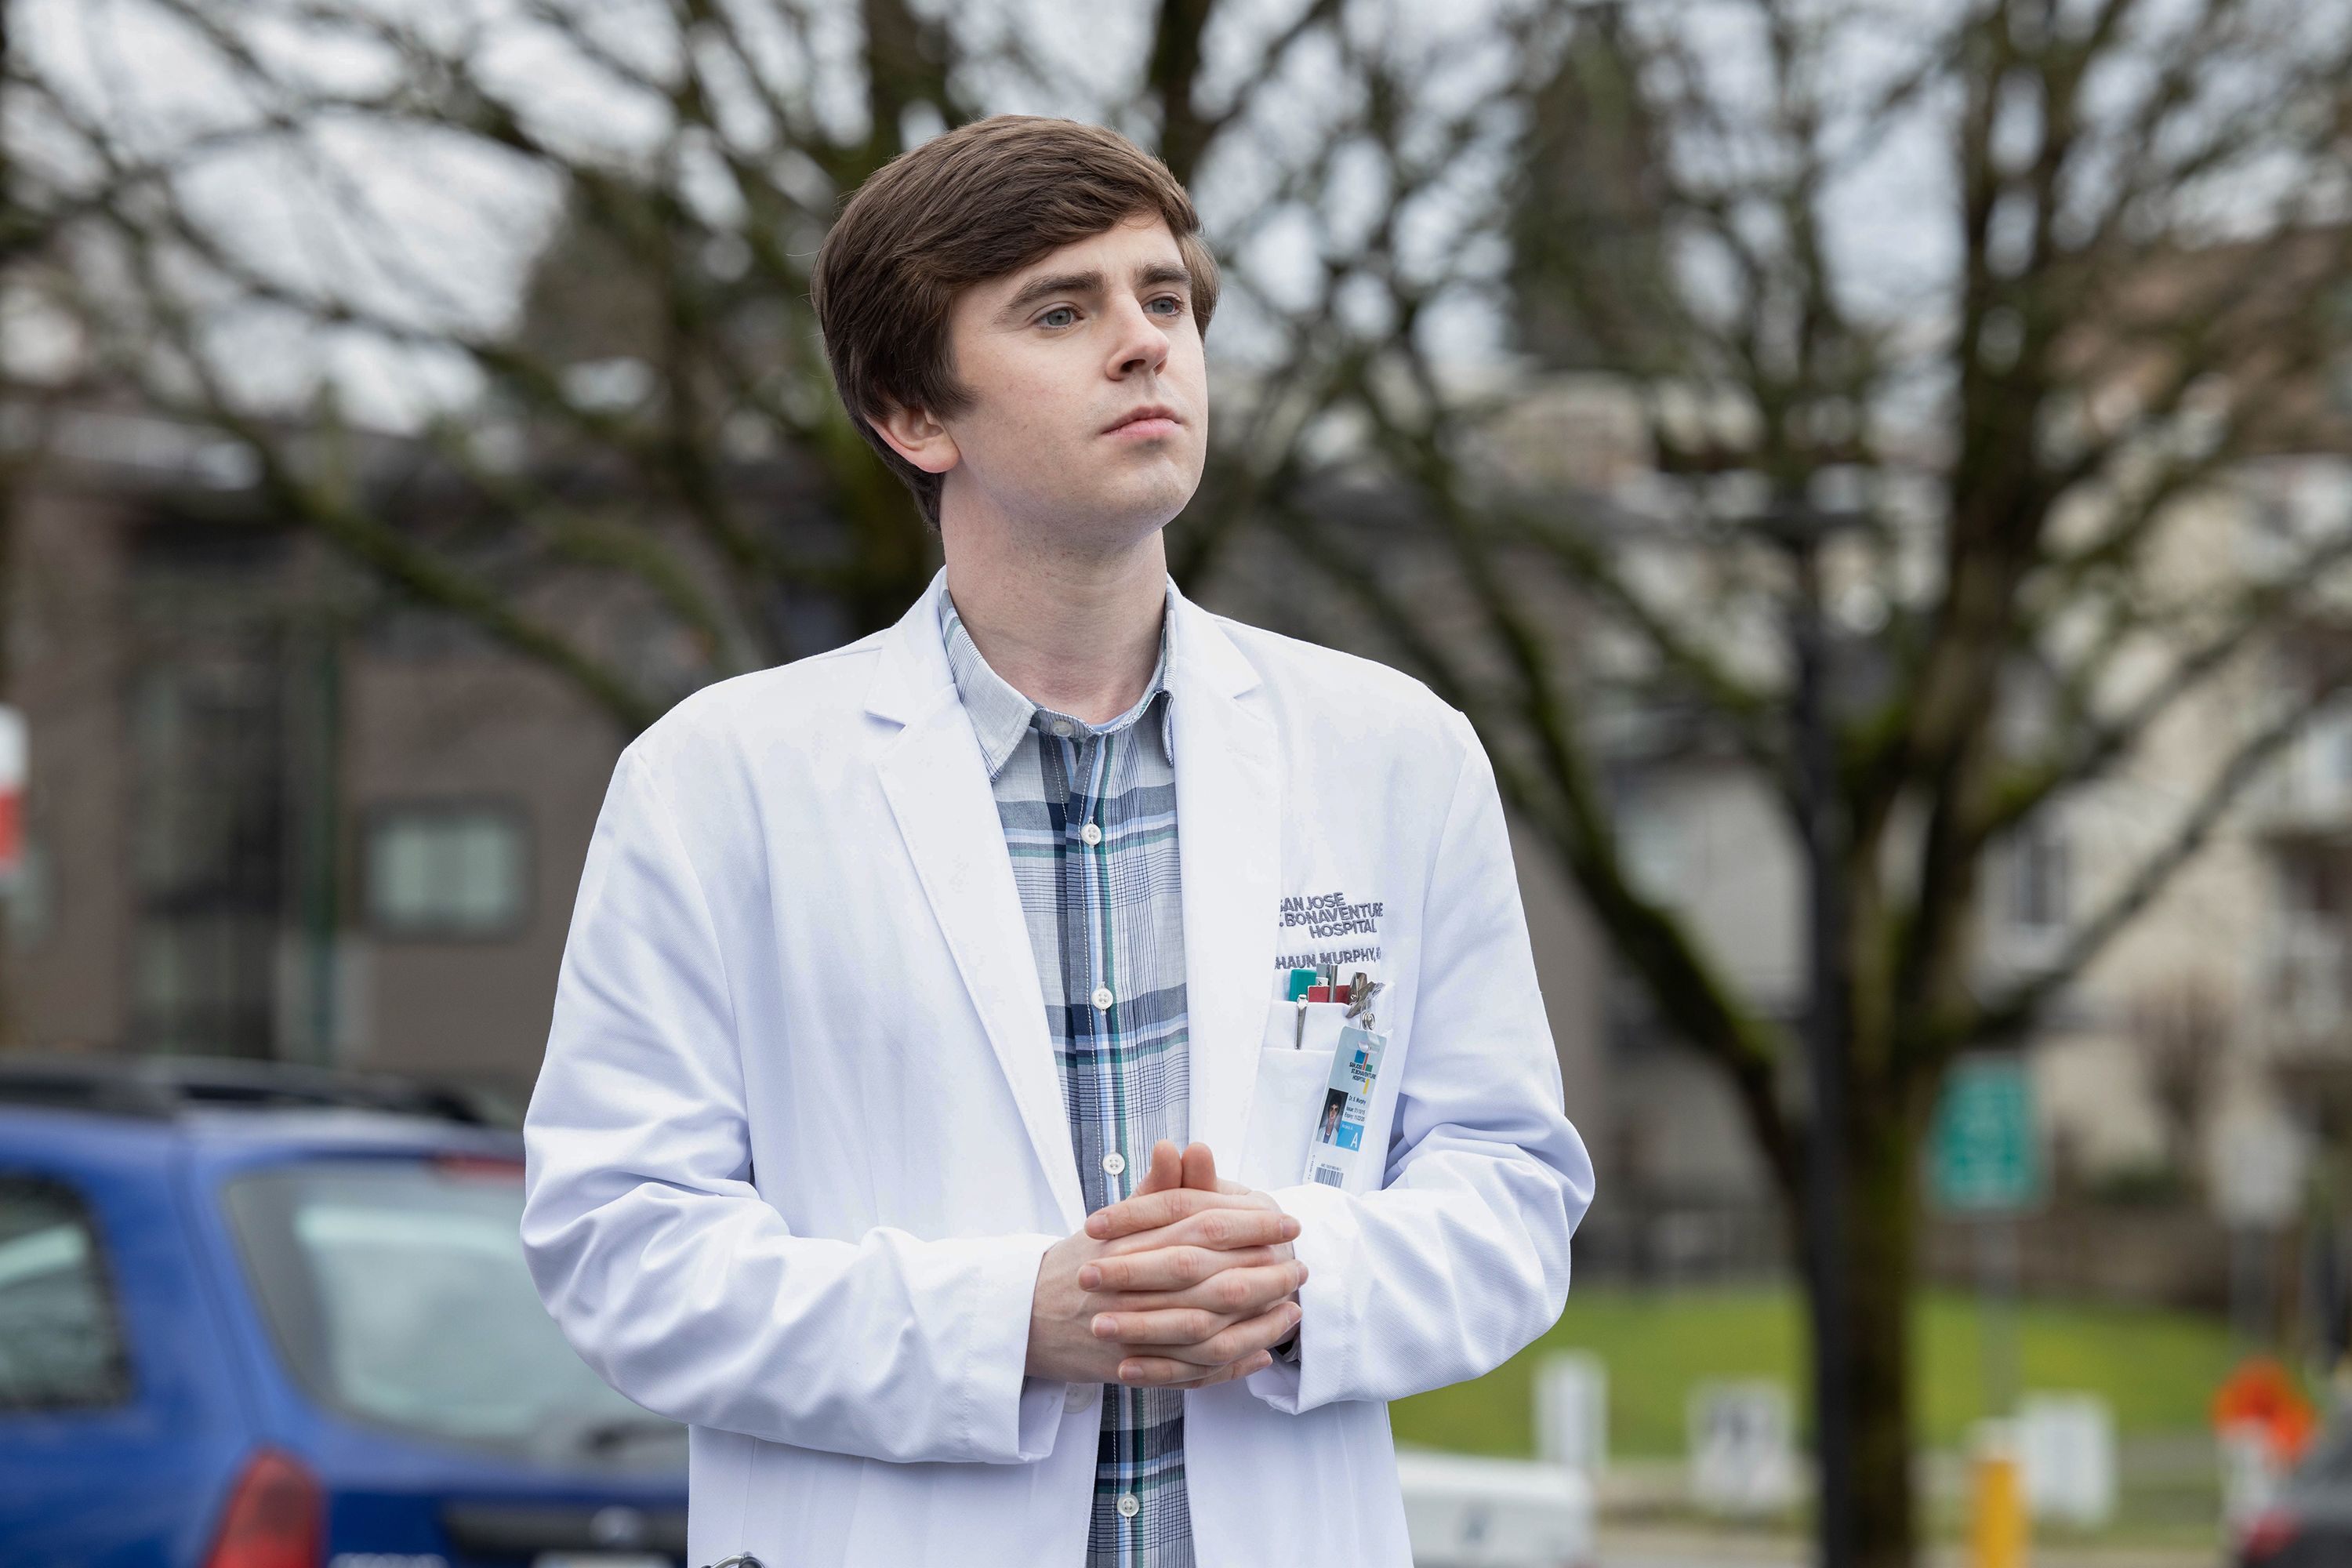 One of the scenes of ABC's "The Good Doctor" showing Freddie Highmore who plays Dr. Shaun Murphy on February 03, 2020 | Photo: Getty Images